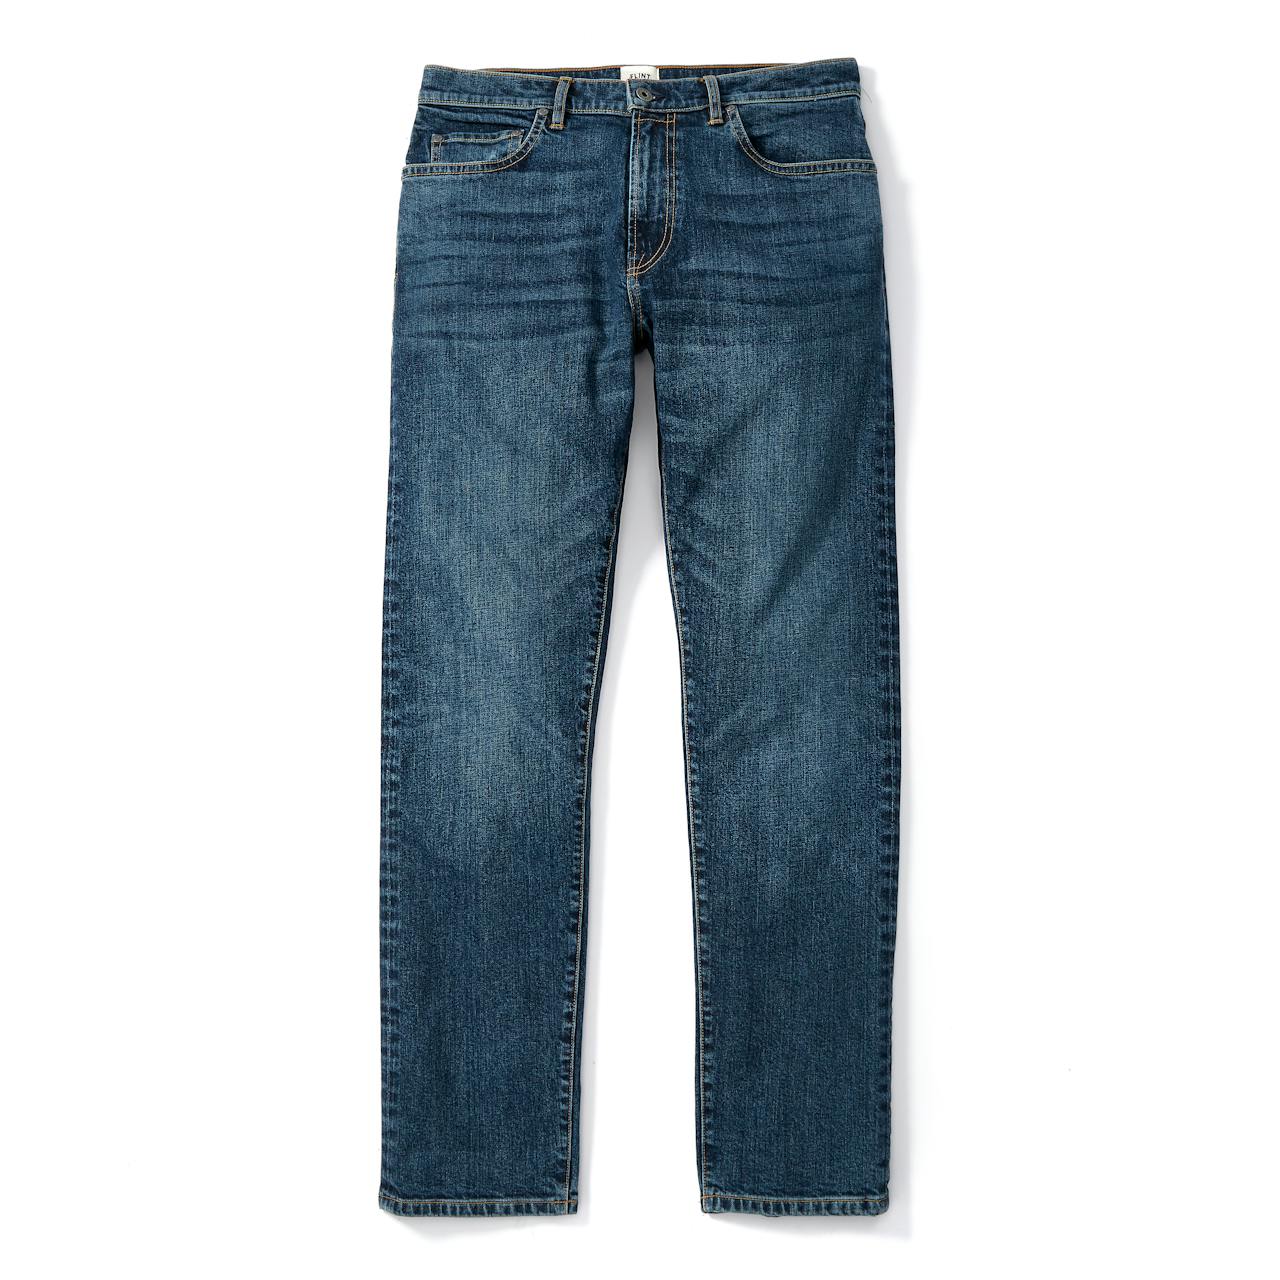 Flint and Tinder 1-Year Wash Jeans - Straight